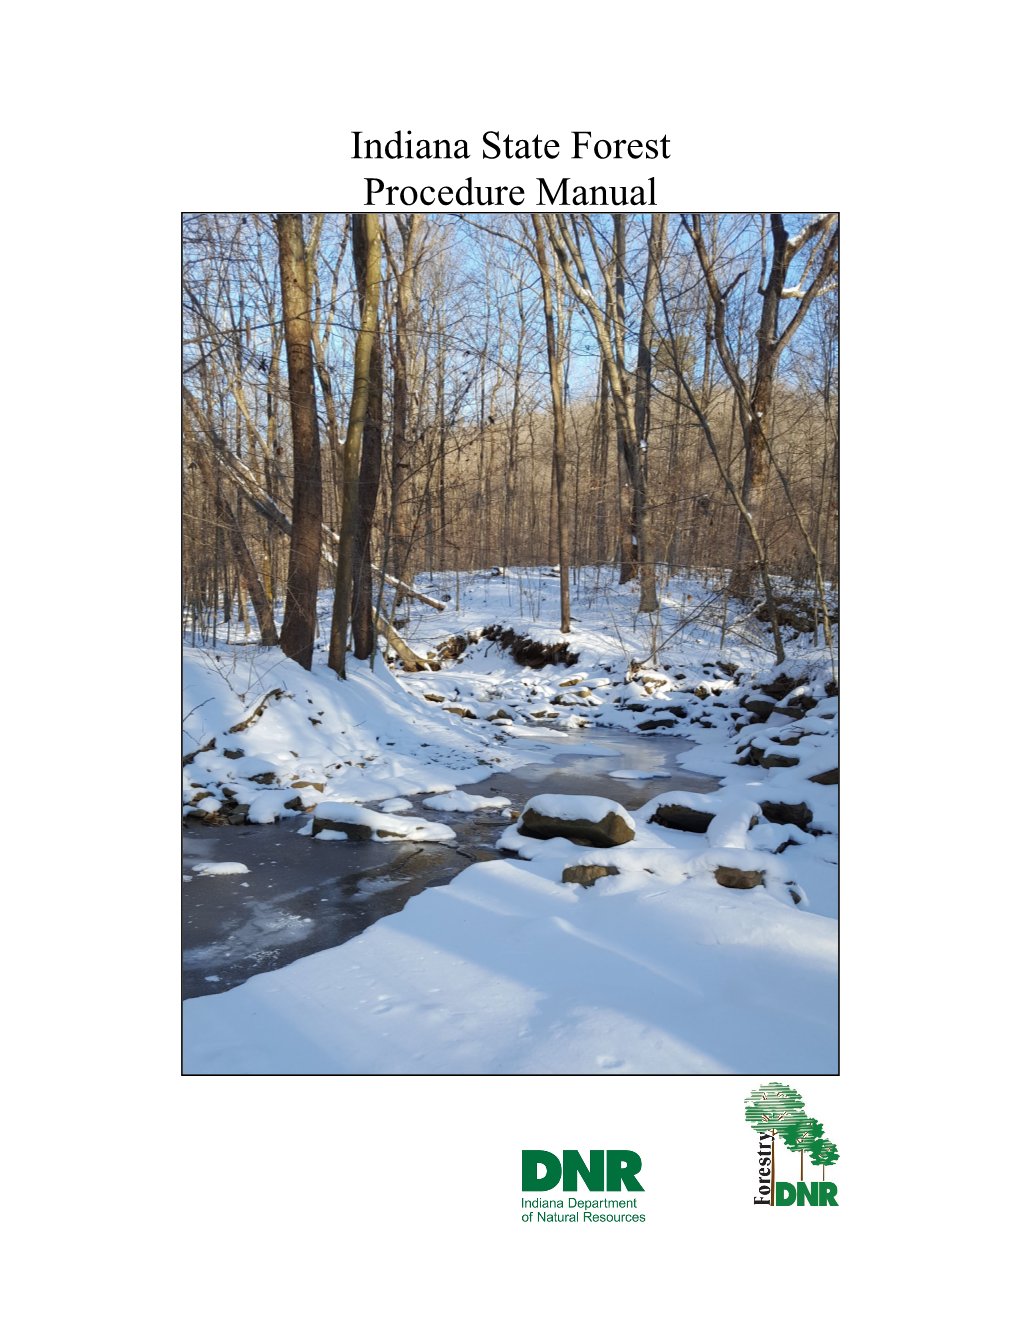 State Forest Procedures Manual